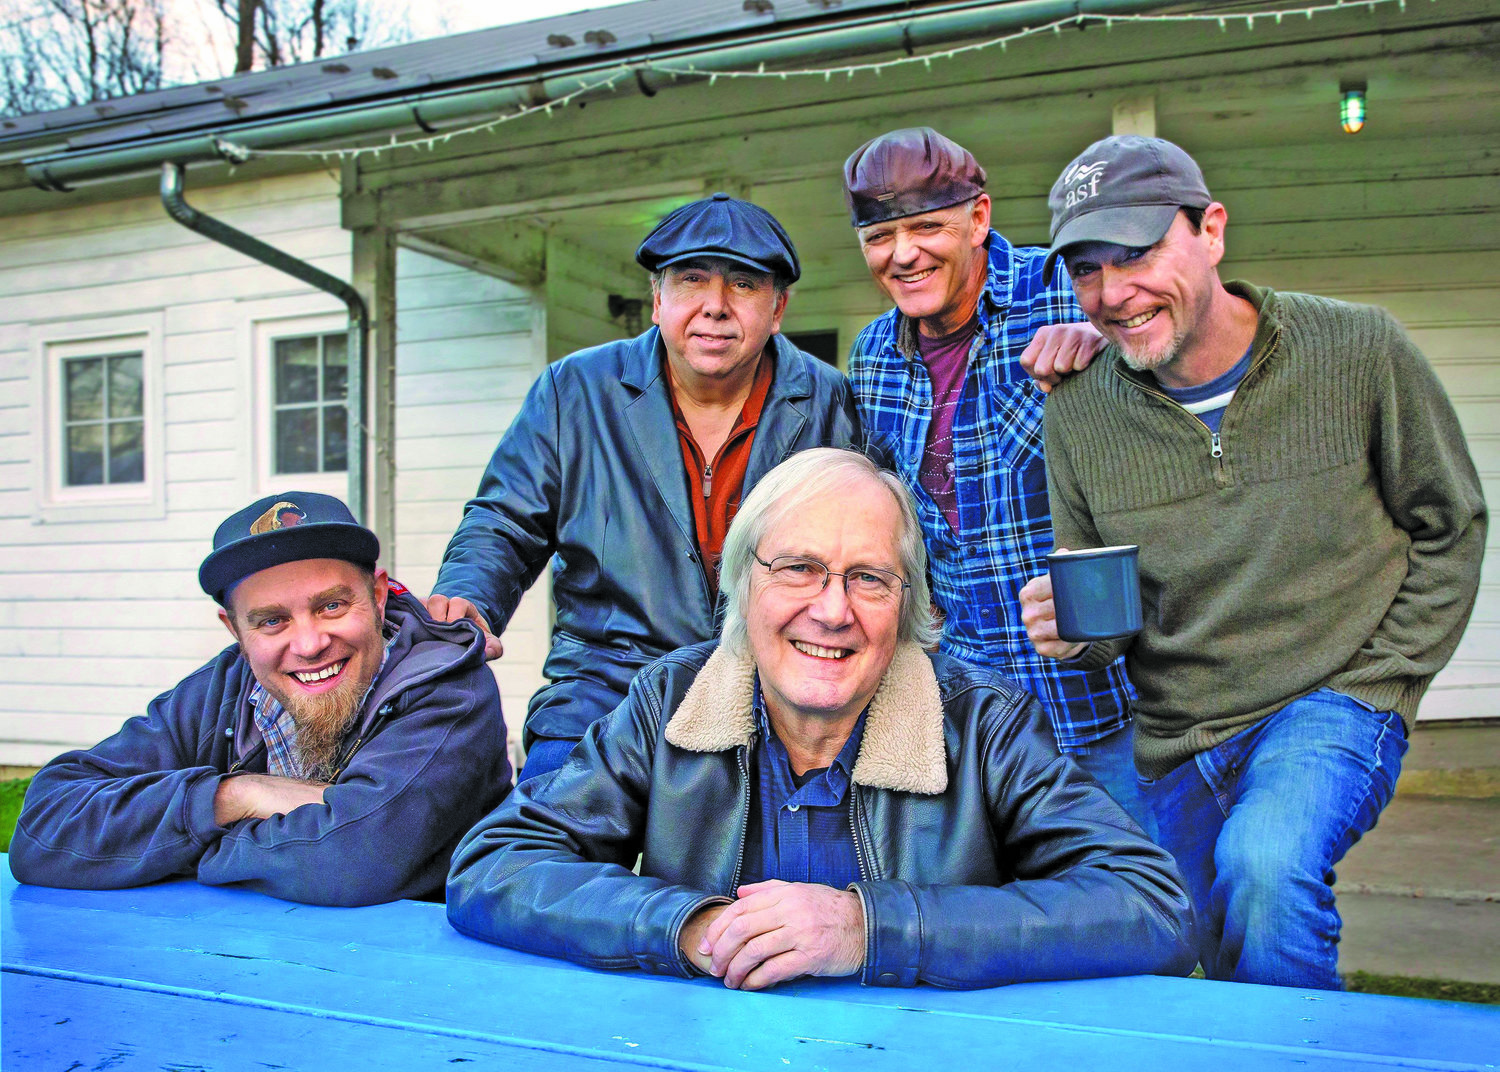 The Weight Band is set to perform songs both old and new at Musikfest Cafe.